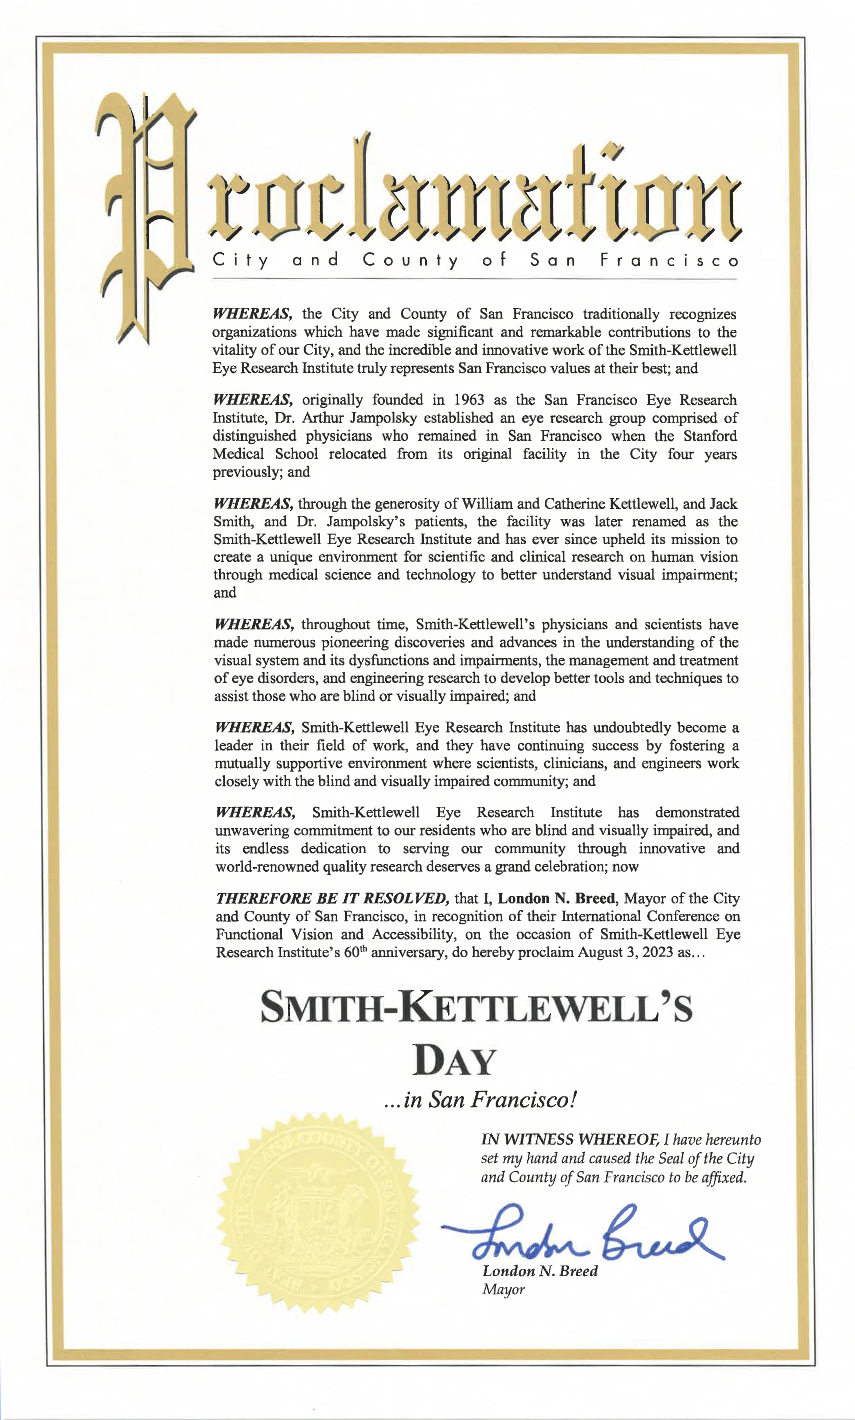 Scanned ceremonial document with a gold trimmed border and florid title reading "Proclamation, City and County of San Francisco." Several recital paragraphs begin with "Whereas" and cite Smith-Kettlewell's 1963 founding, its early support from donors and patients, its ongoing pioneering research, and a demonstrated commitment to the community of blind and visually impaired persons. The document concludes with Mayor London Breed's proclamation of August 3, 2023 as Smith-Kettlewell's Day in San Francisco.